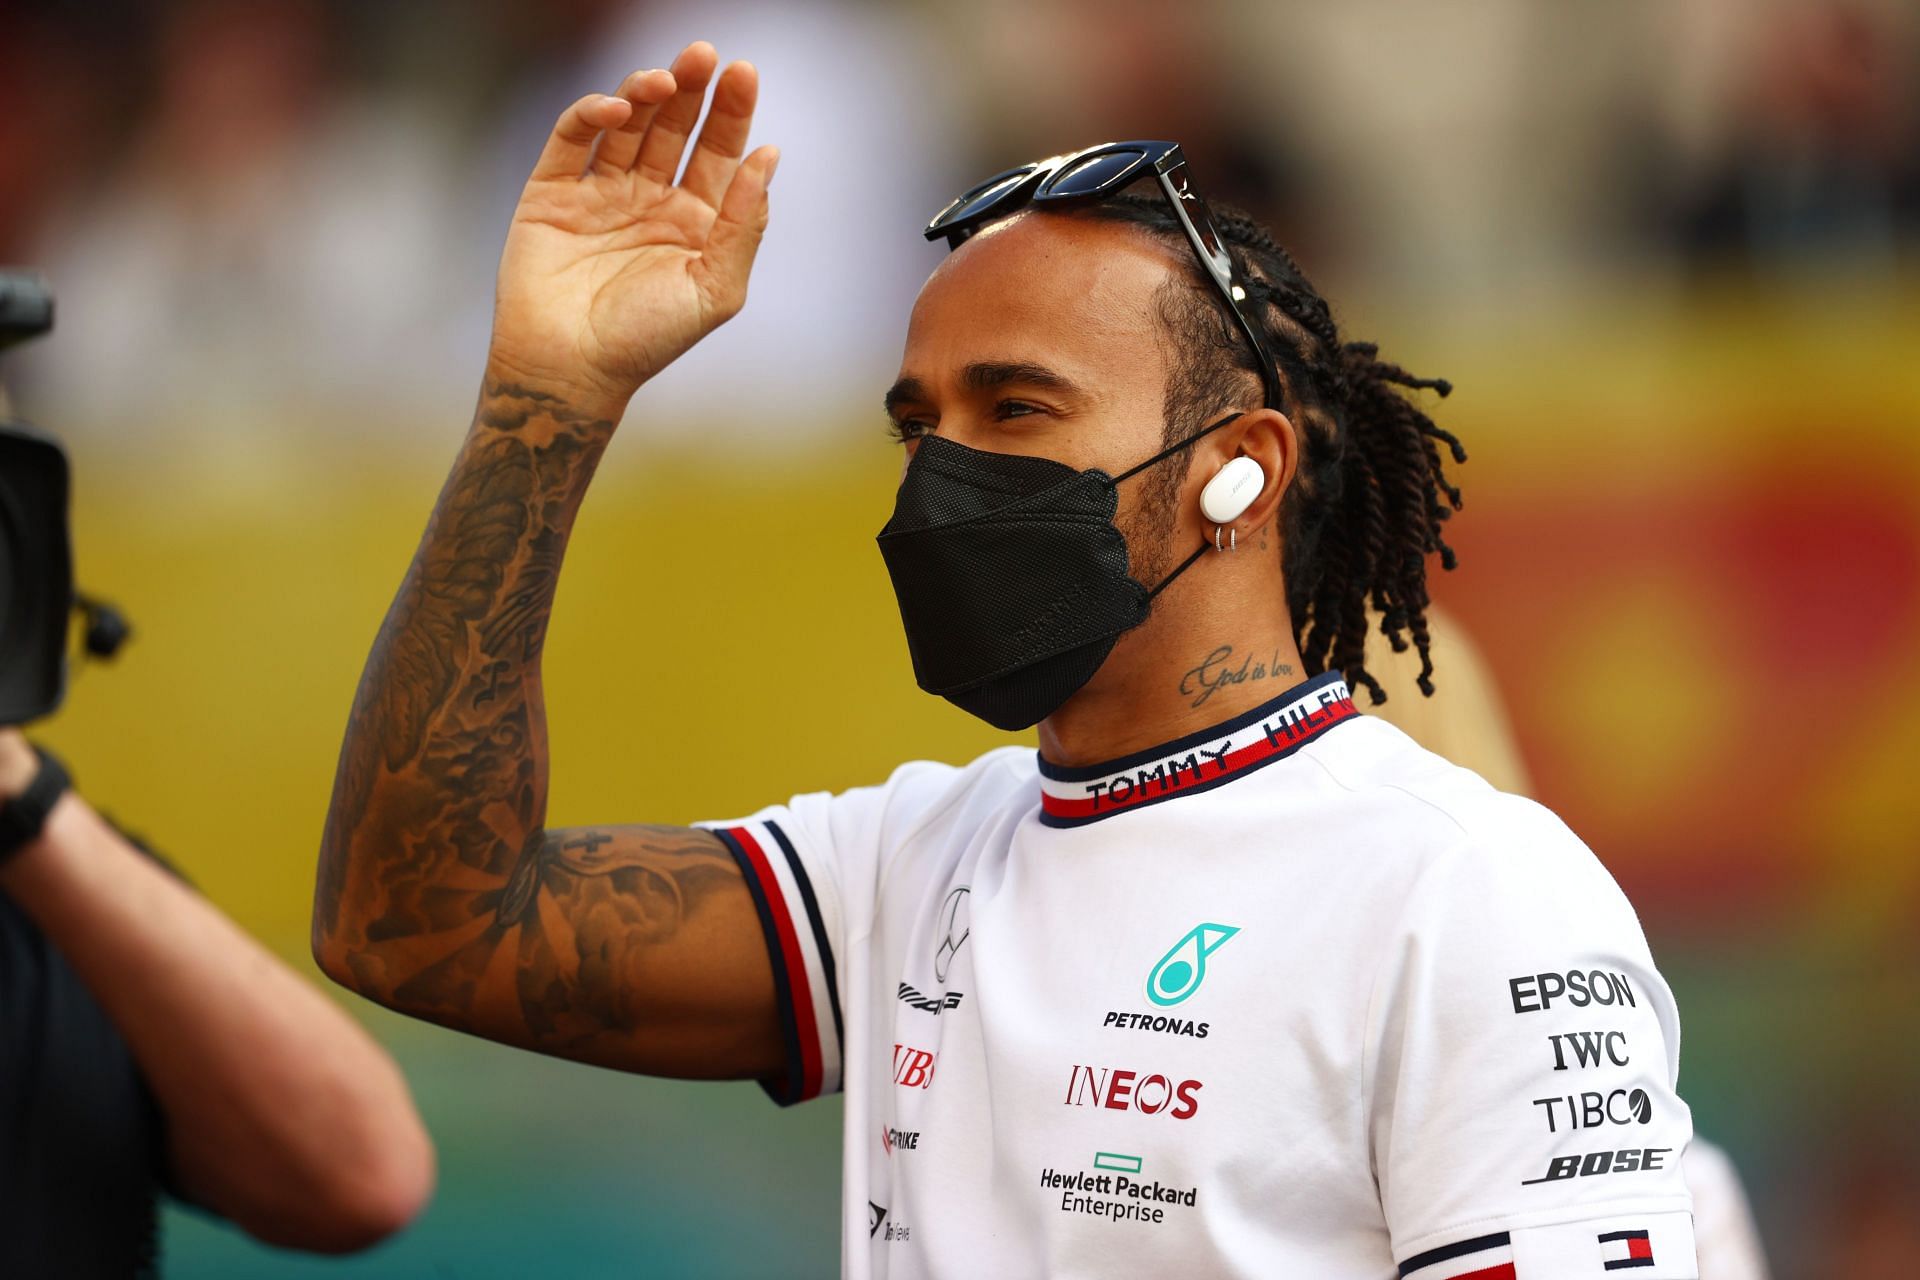 Lewis Hamilton recently broke his silence on social media after a lengthy absence (Photo by Clive Rose/Getty Images)